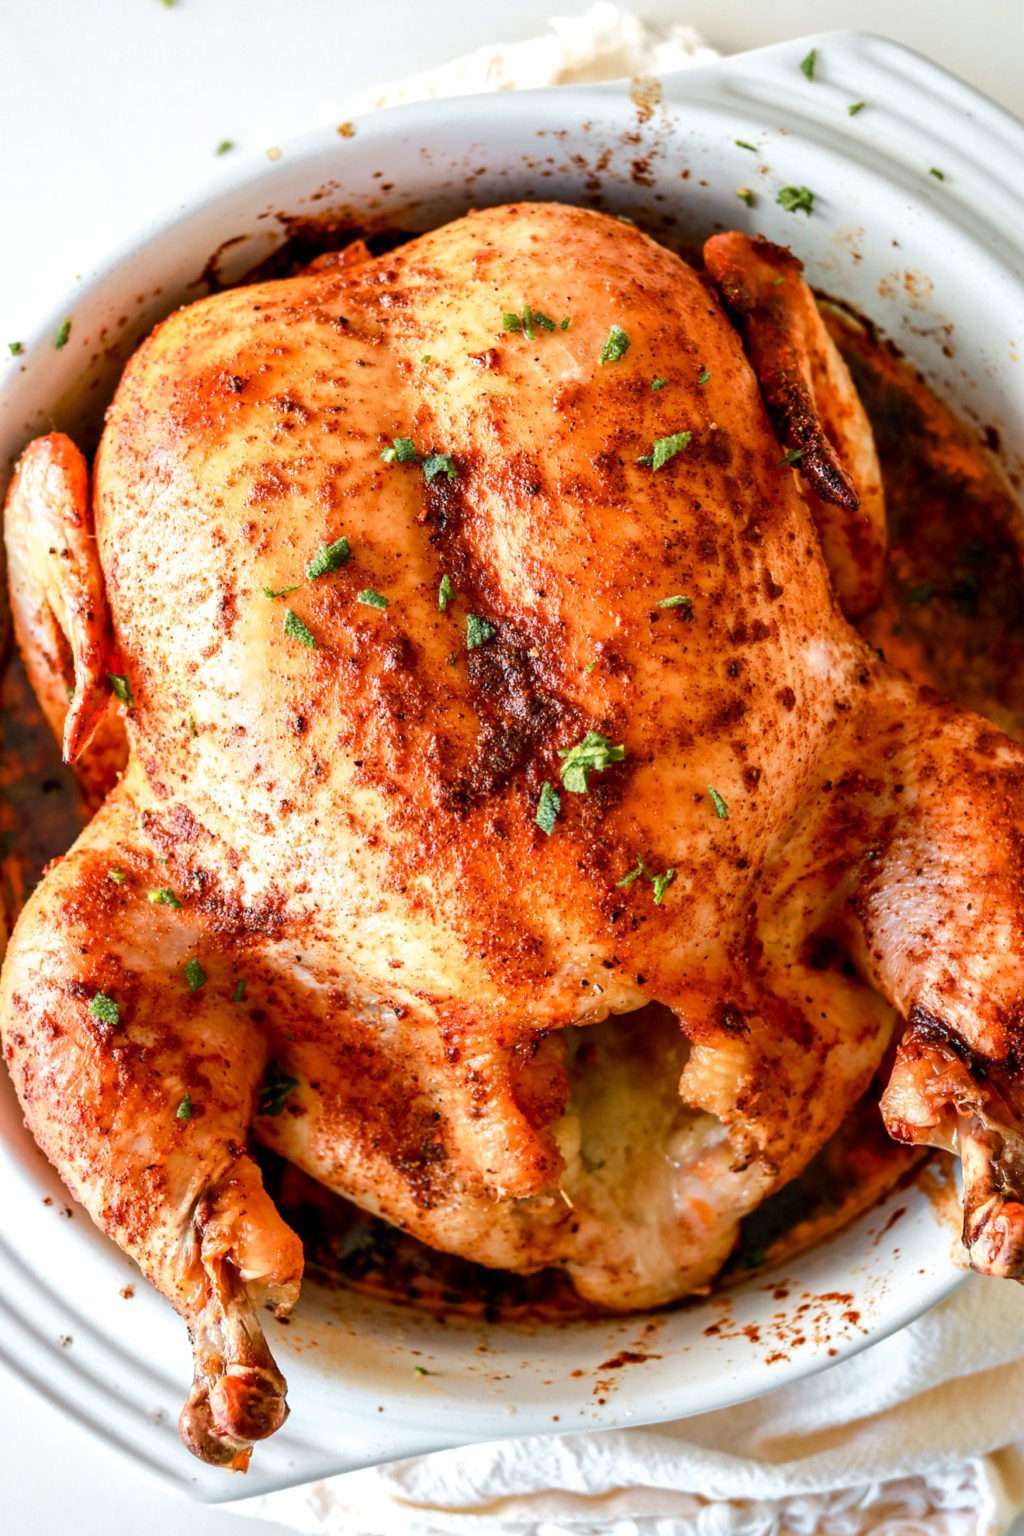 Juicy Whole Roasted Chicken The Toasted Pine Nut